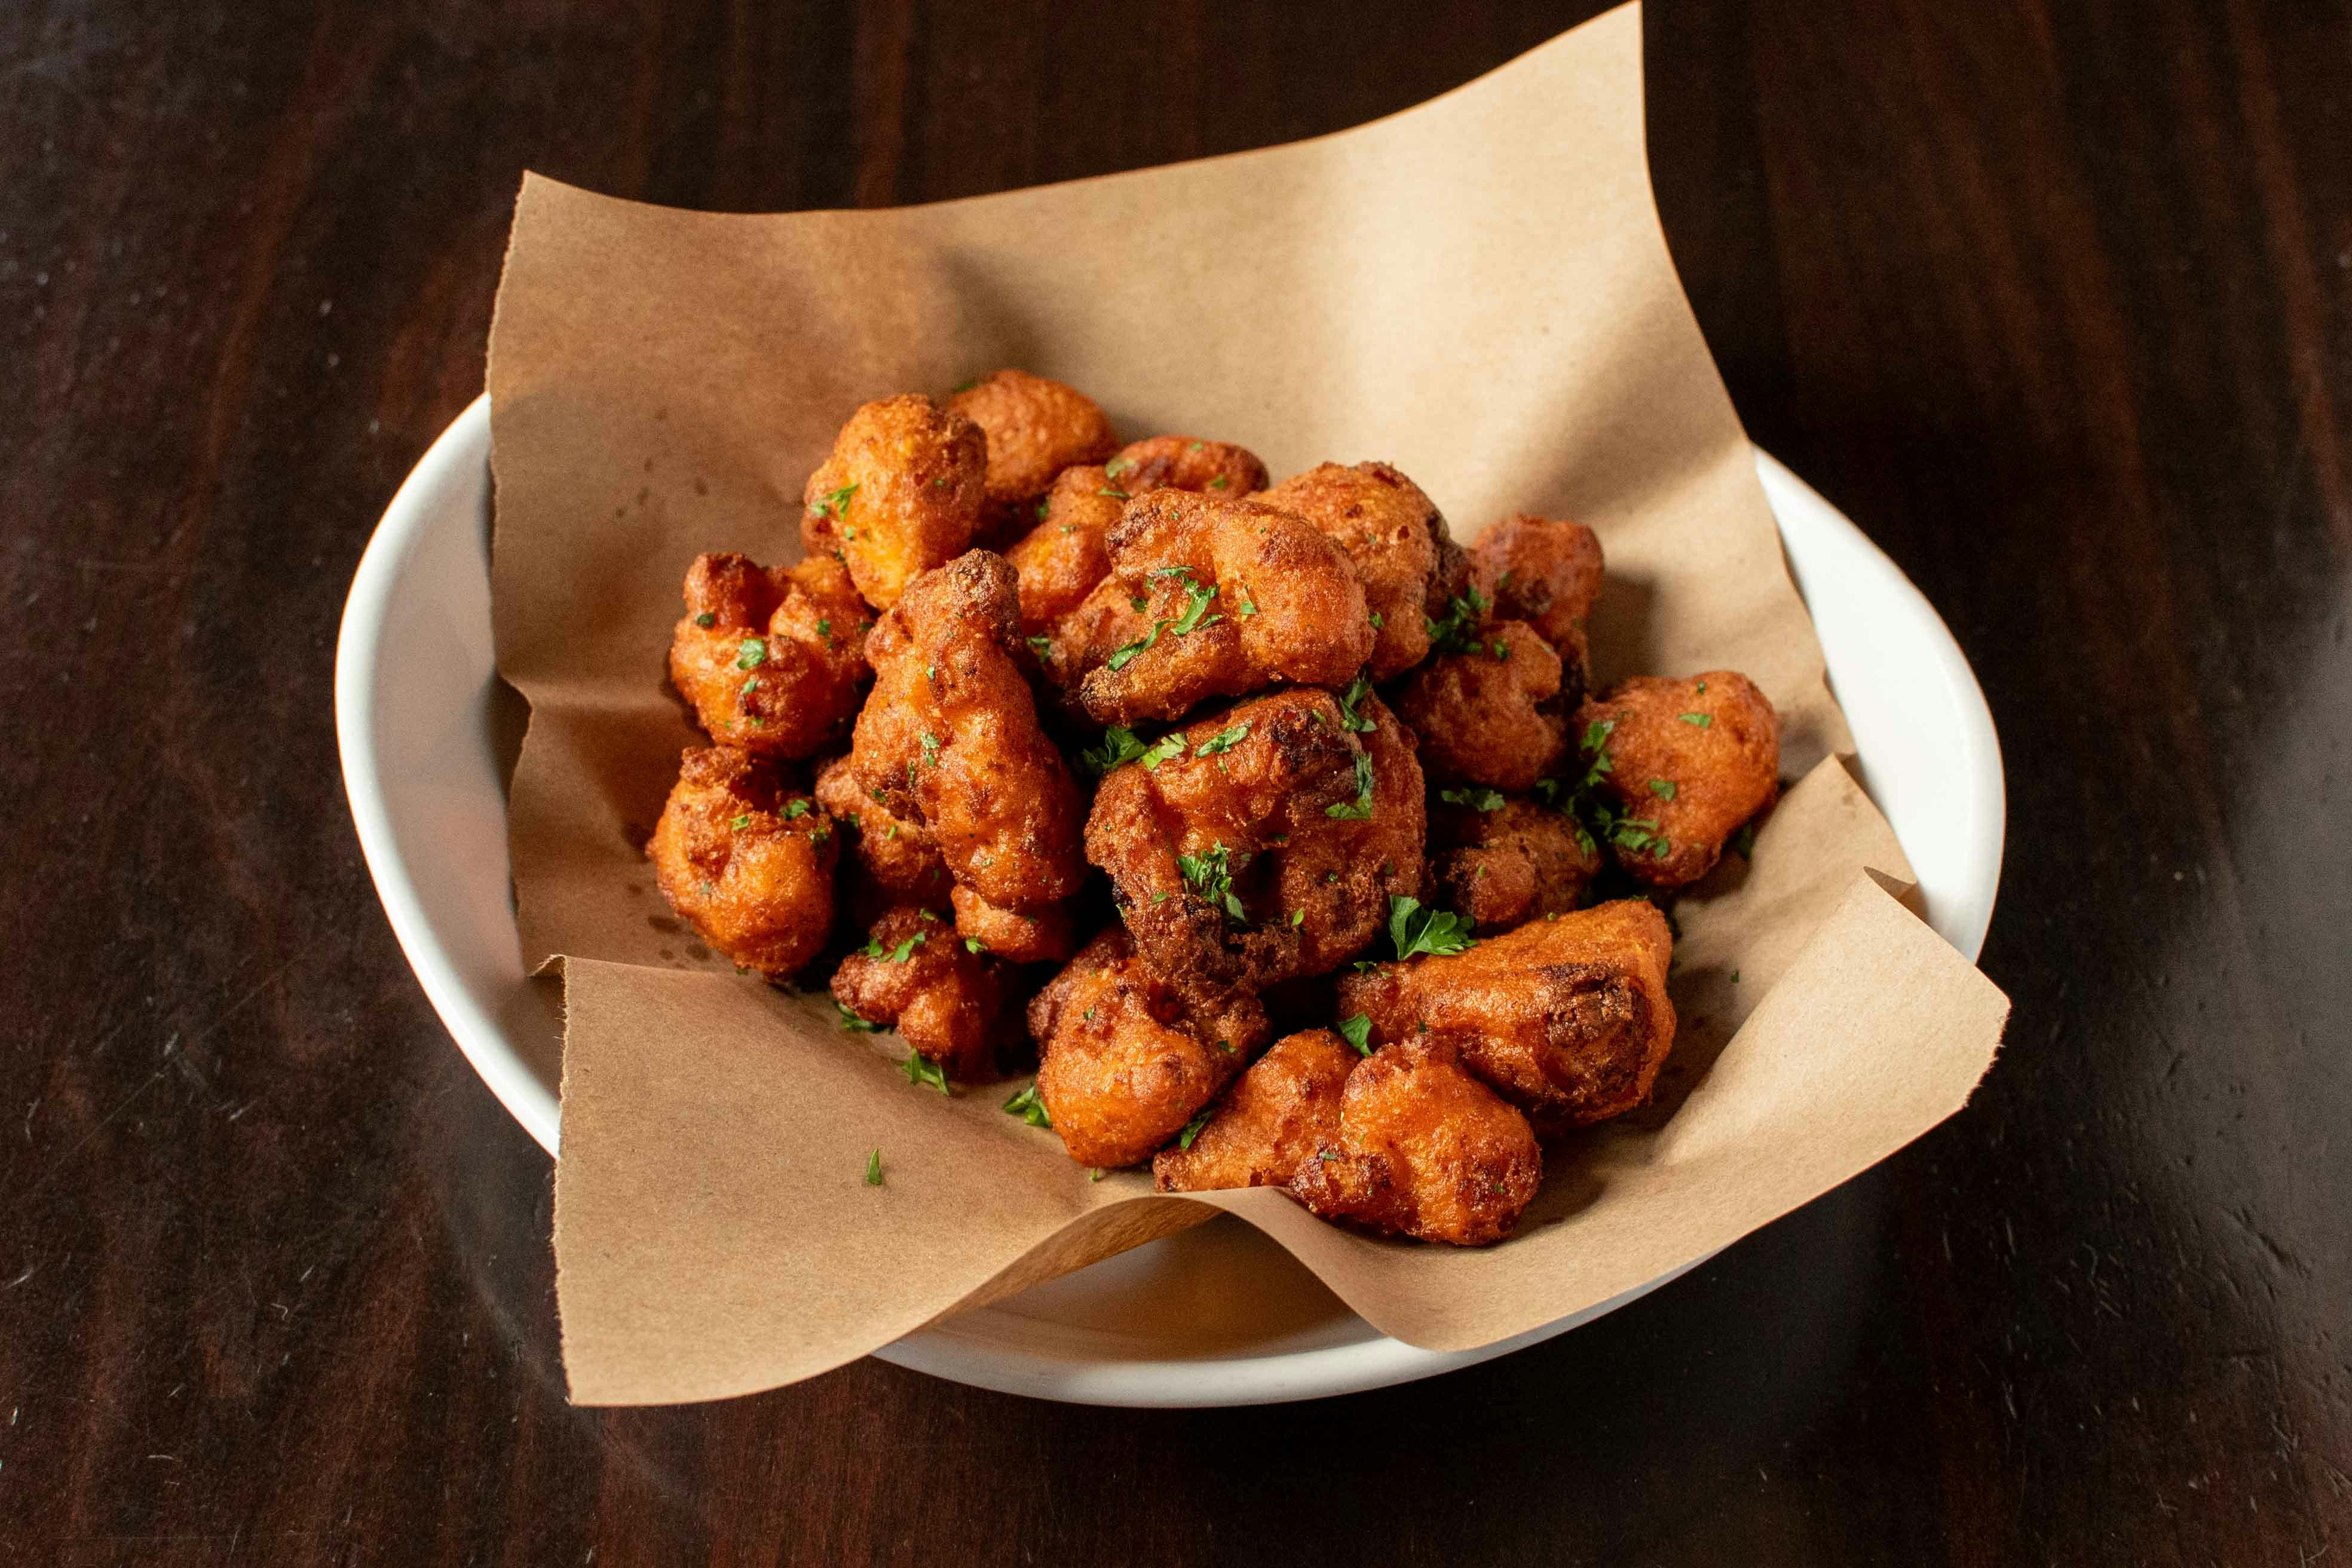 Fried Cauliflower Bites from Midcoast Wings - Downtown Madison in Madison, WI